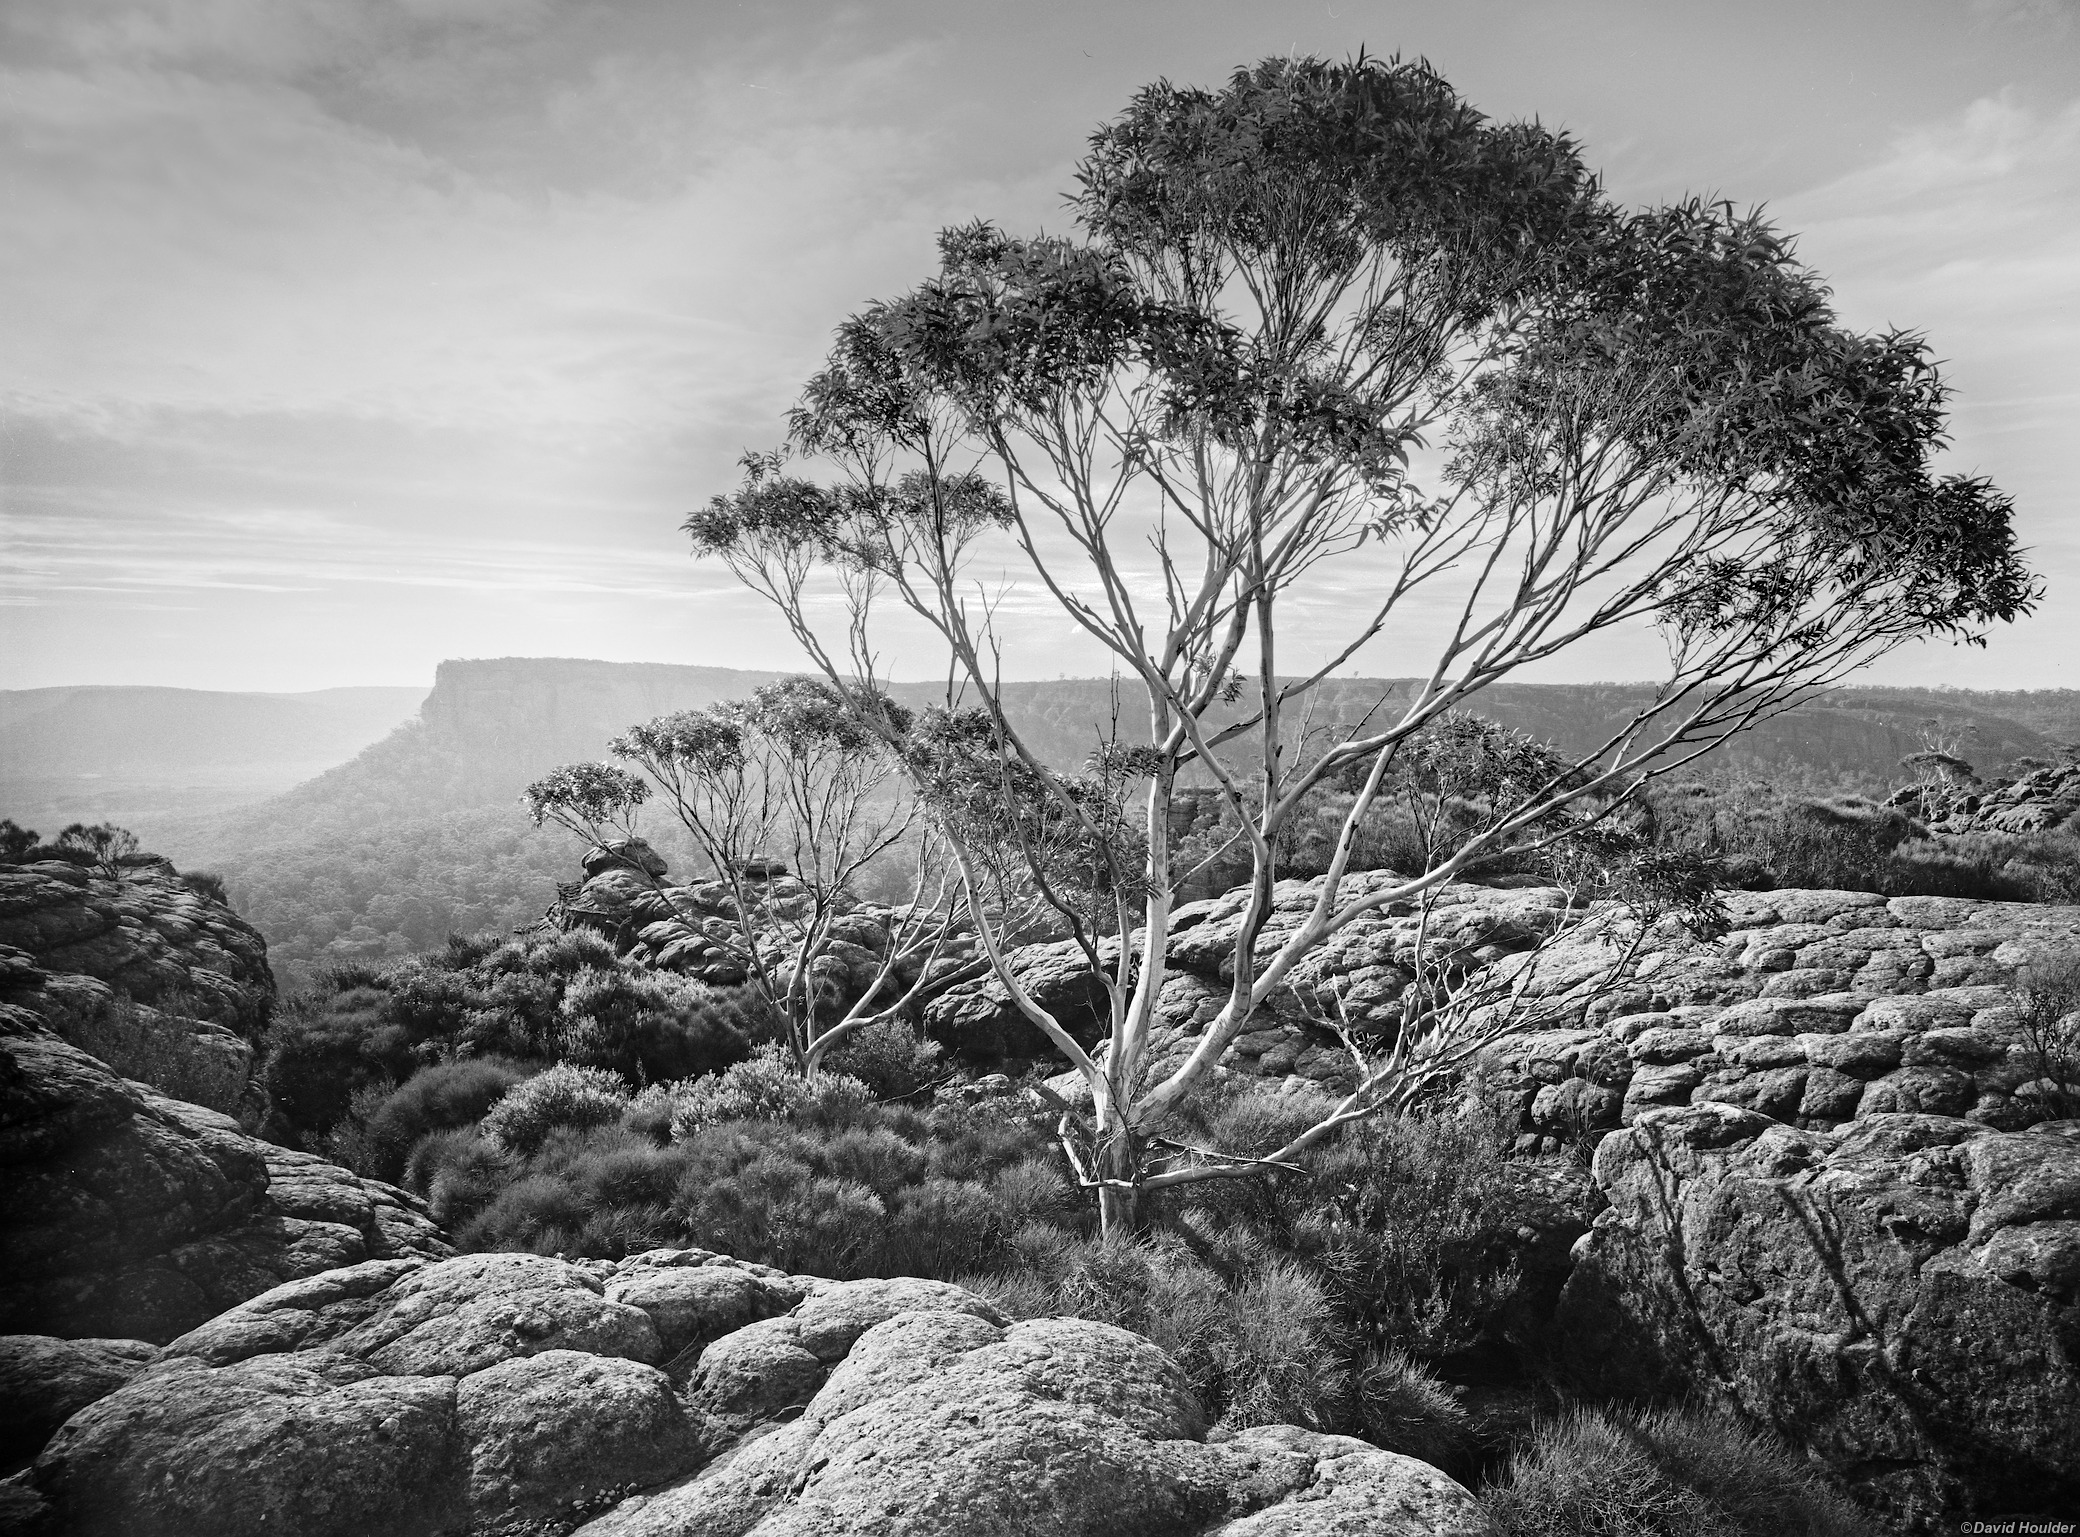 Two small eucalypt trees in a rocky landscape with a distant escarpment on the horizon.